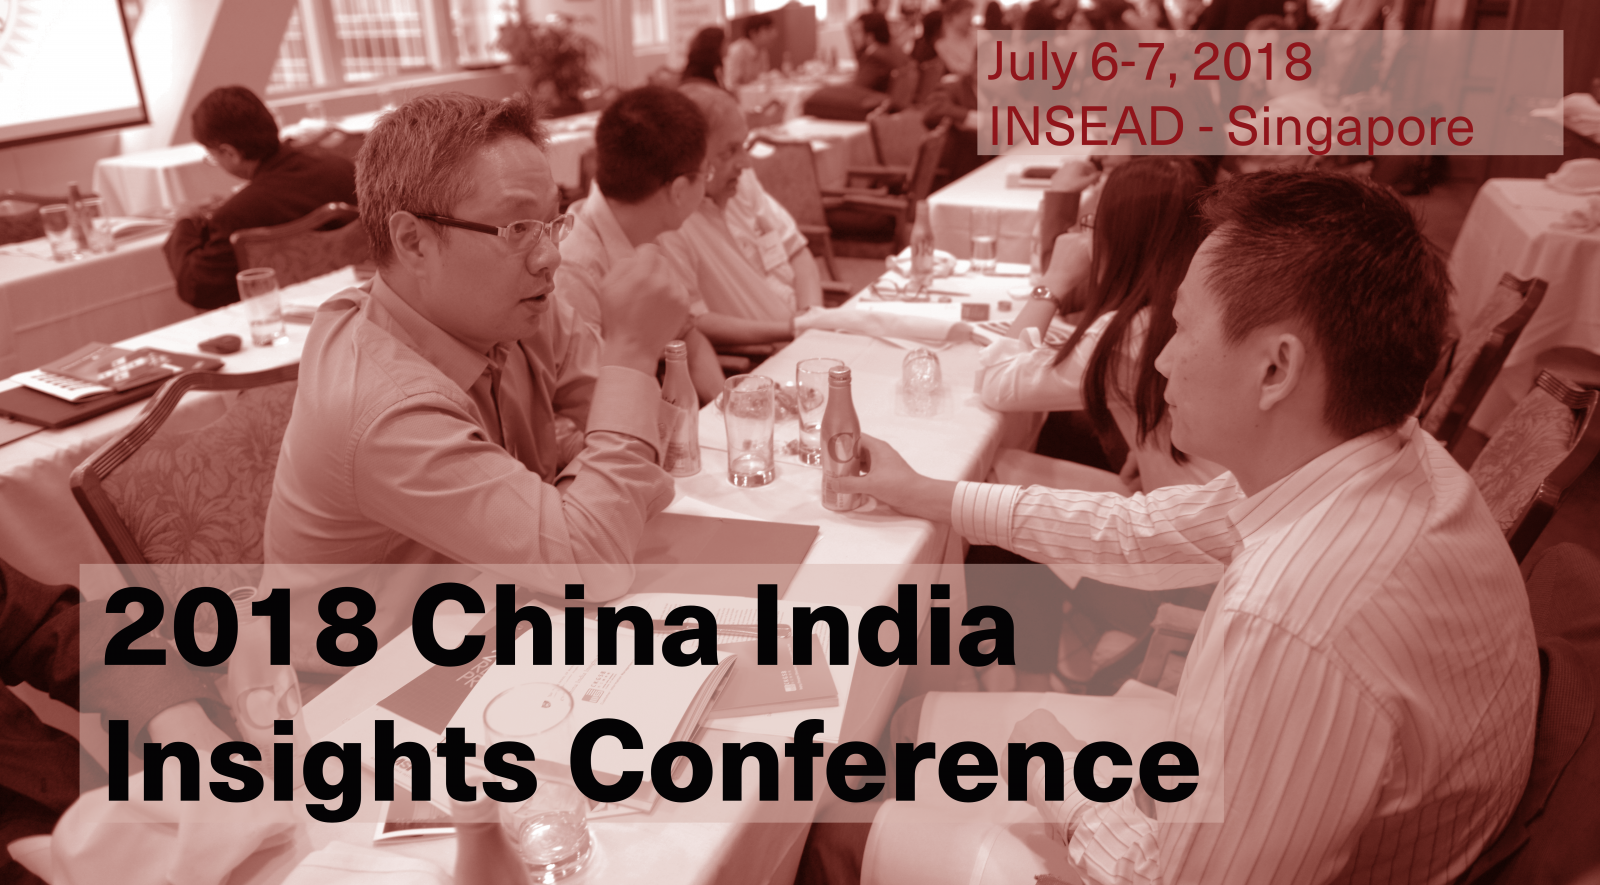 2018 China India Insights Conference | July 6-7 at INSEAD Singapore